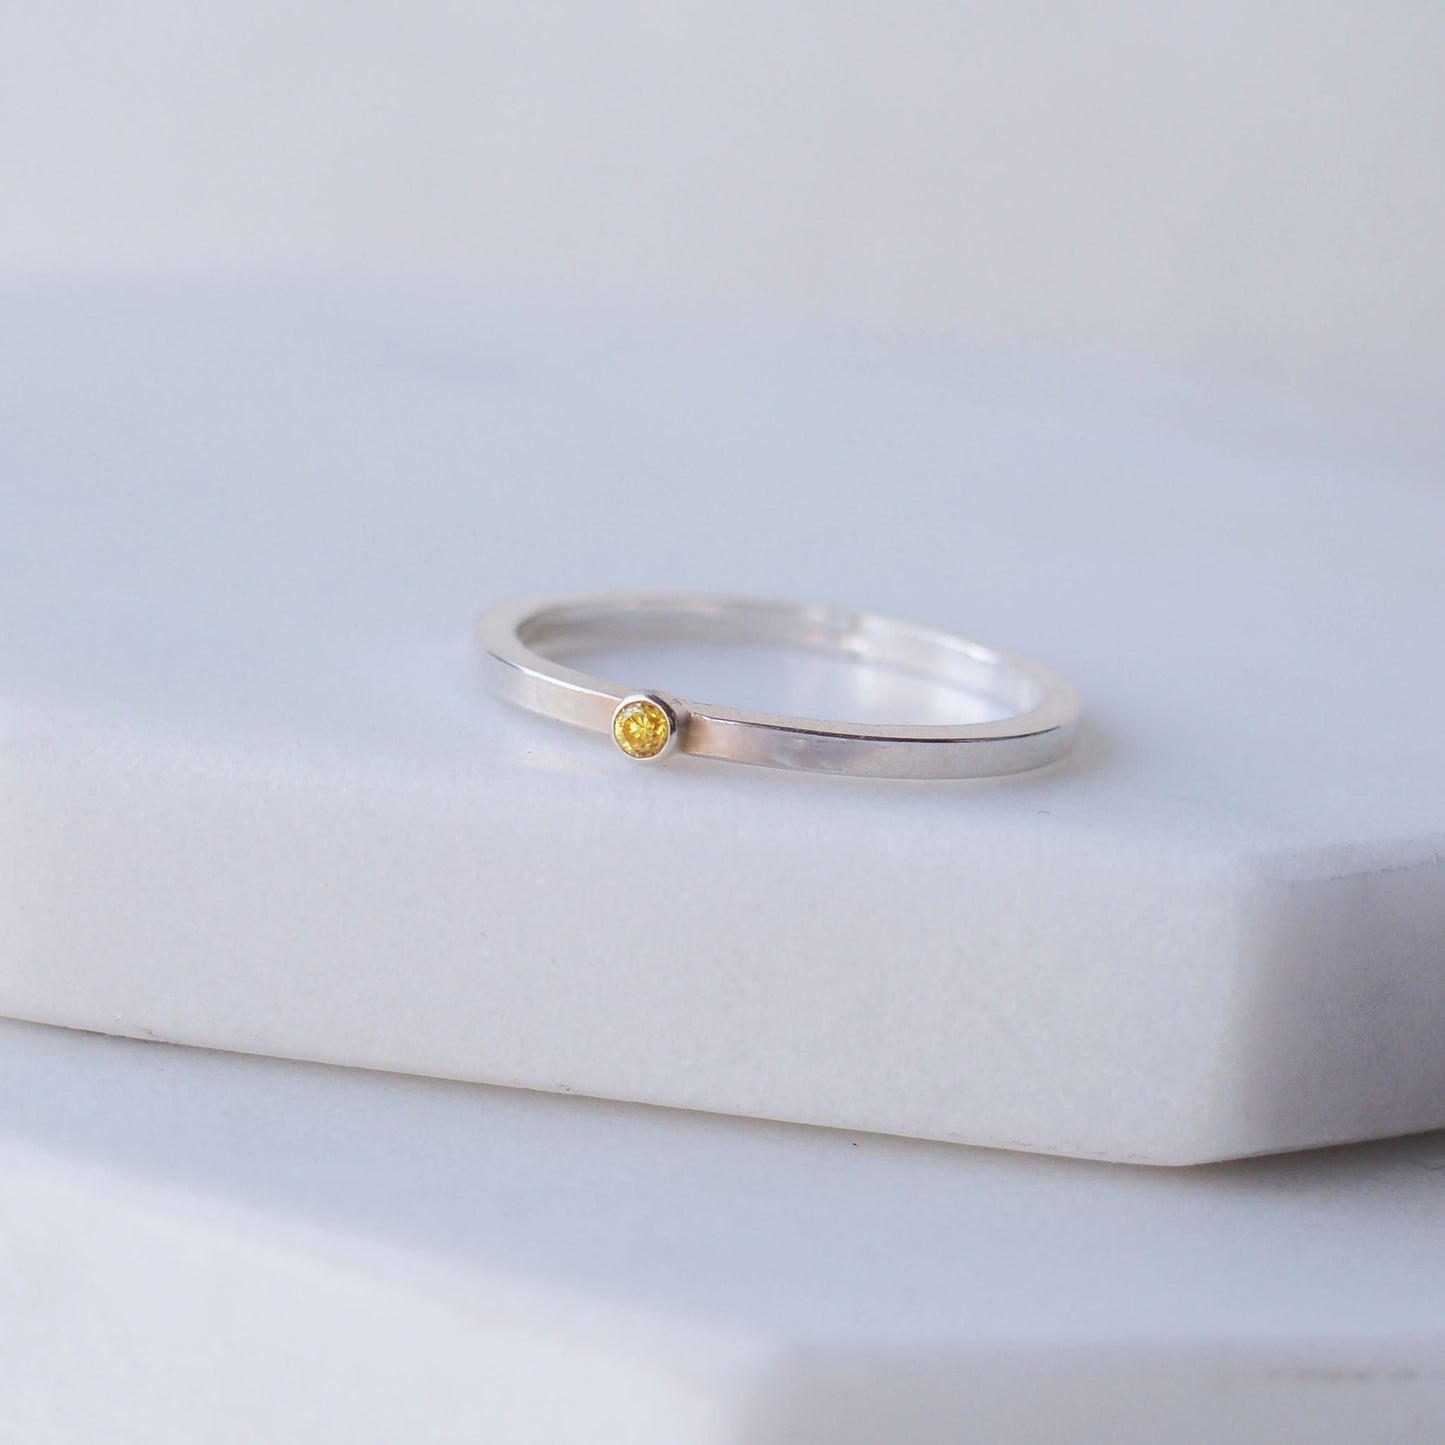 Citrine facet cut ring with a tiny gemstone set onto a square wire band in Sterling Silver. Handmade by maram jewellery in Scotland UK